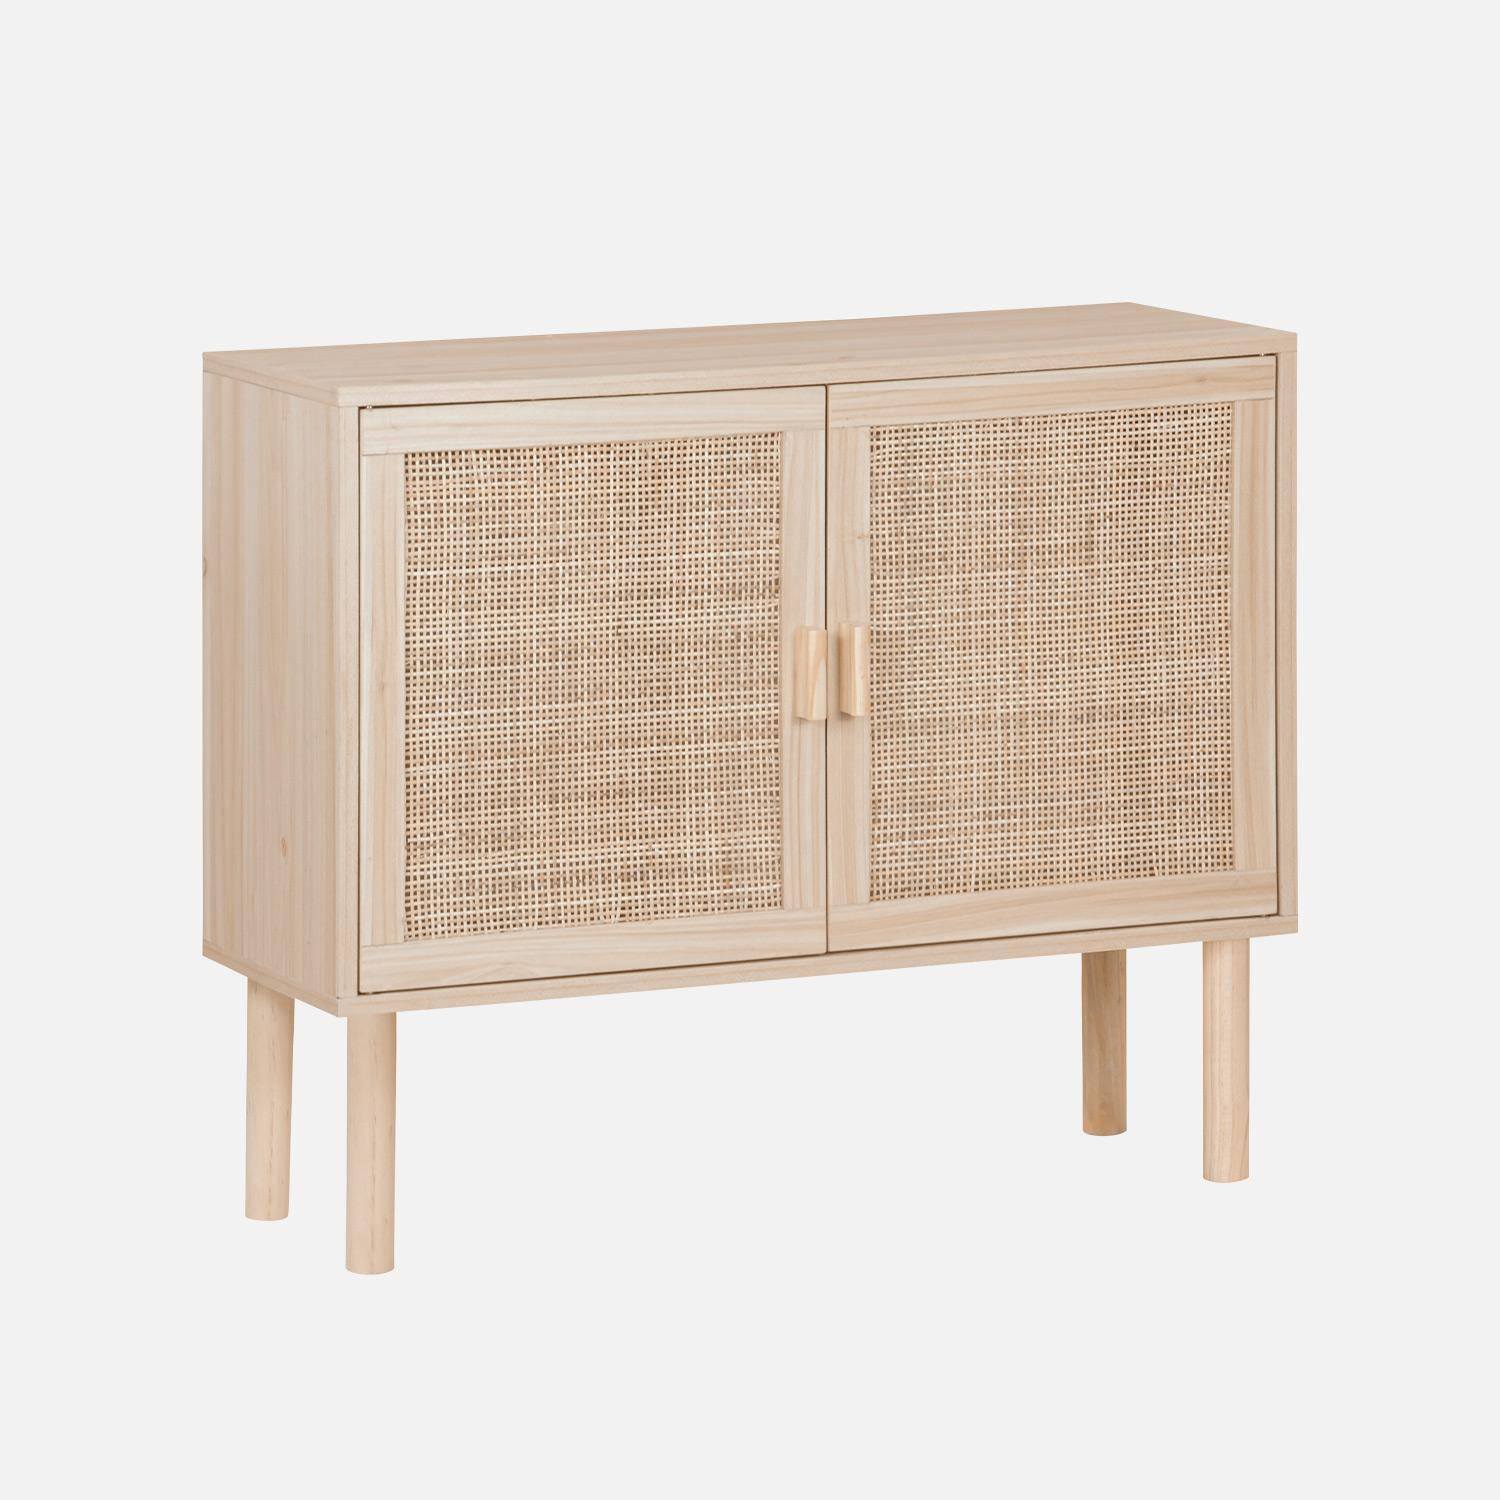 Wood and woven rattan 2-door storage cabinet with shelves, 80x30x68cm, Camargue, Natural Photo3